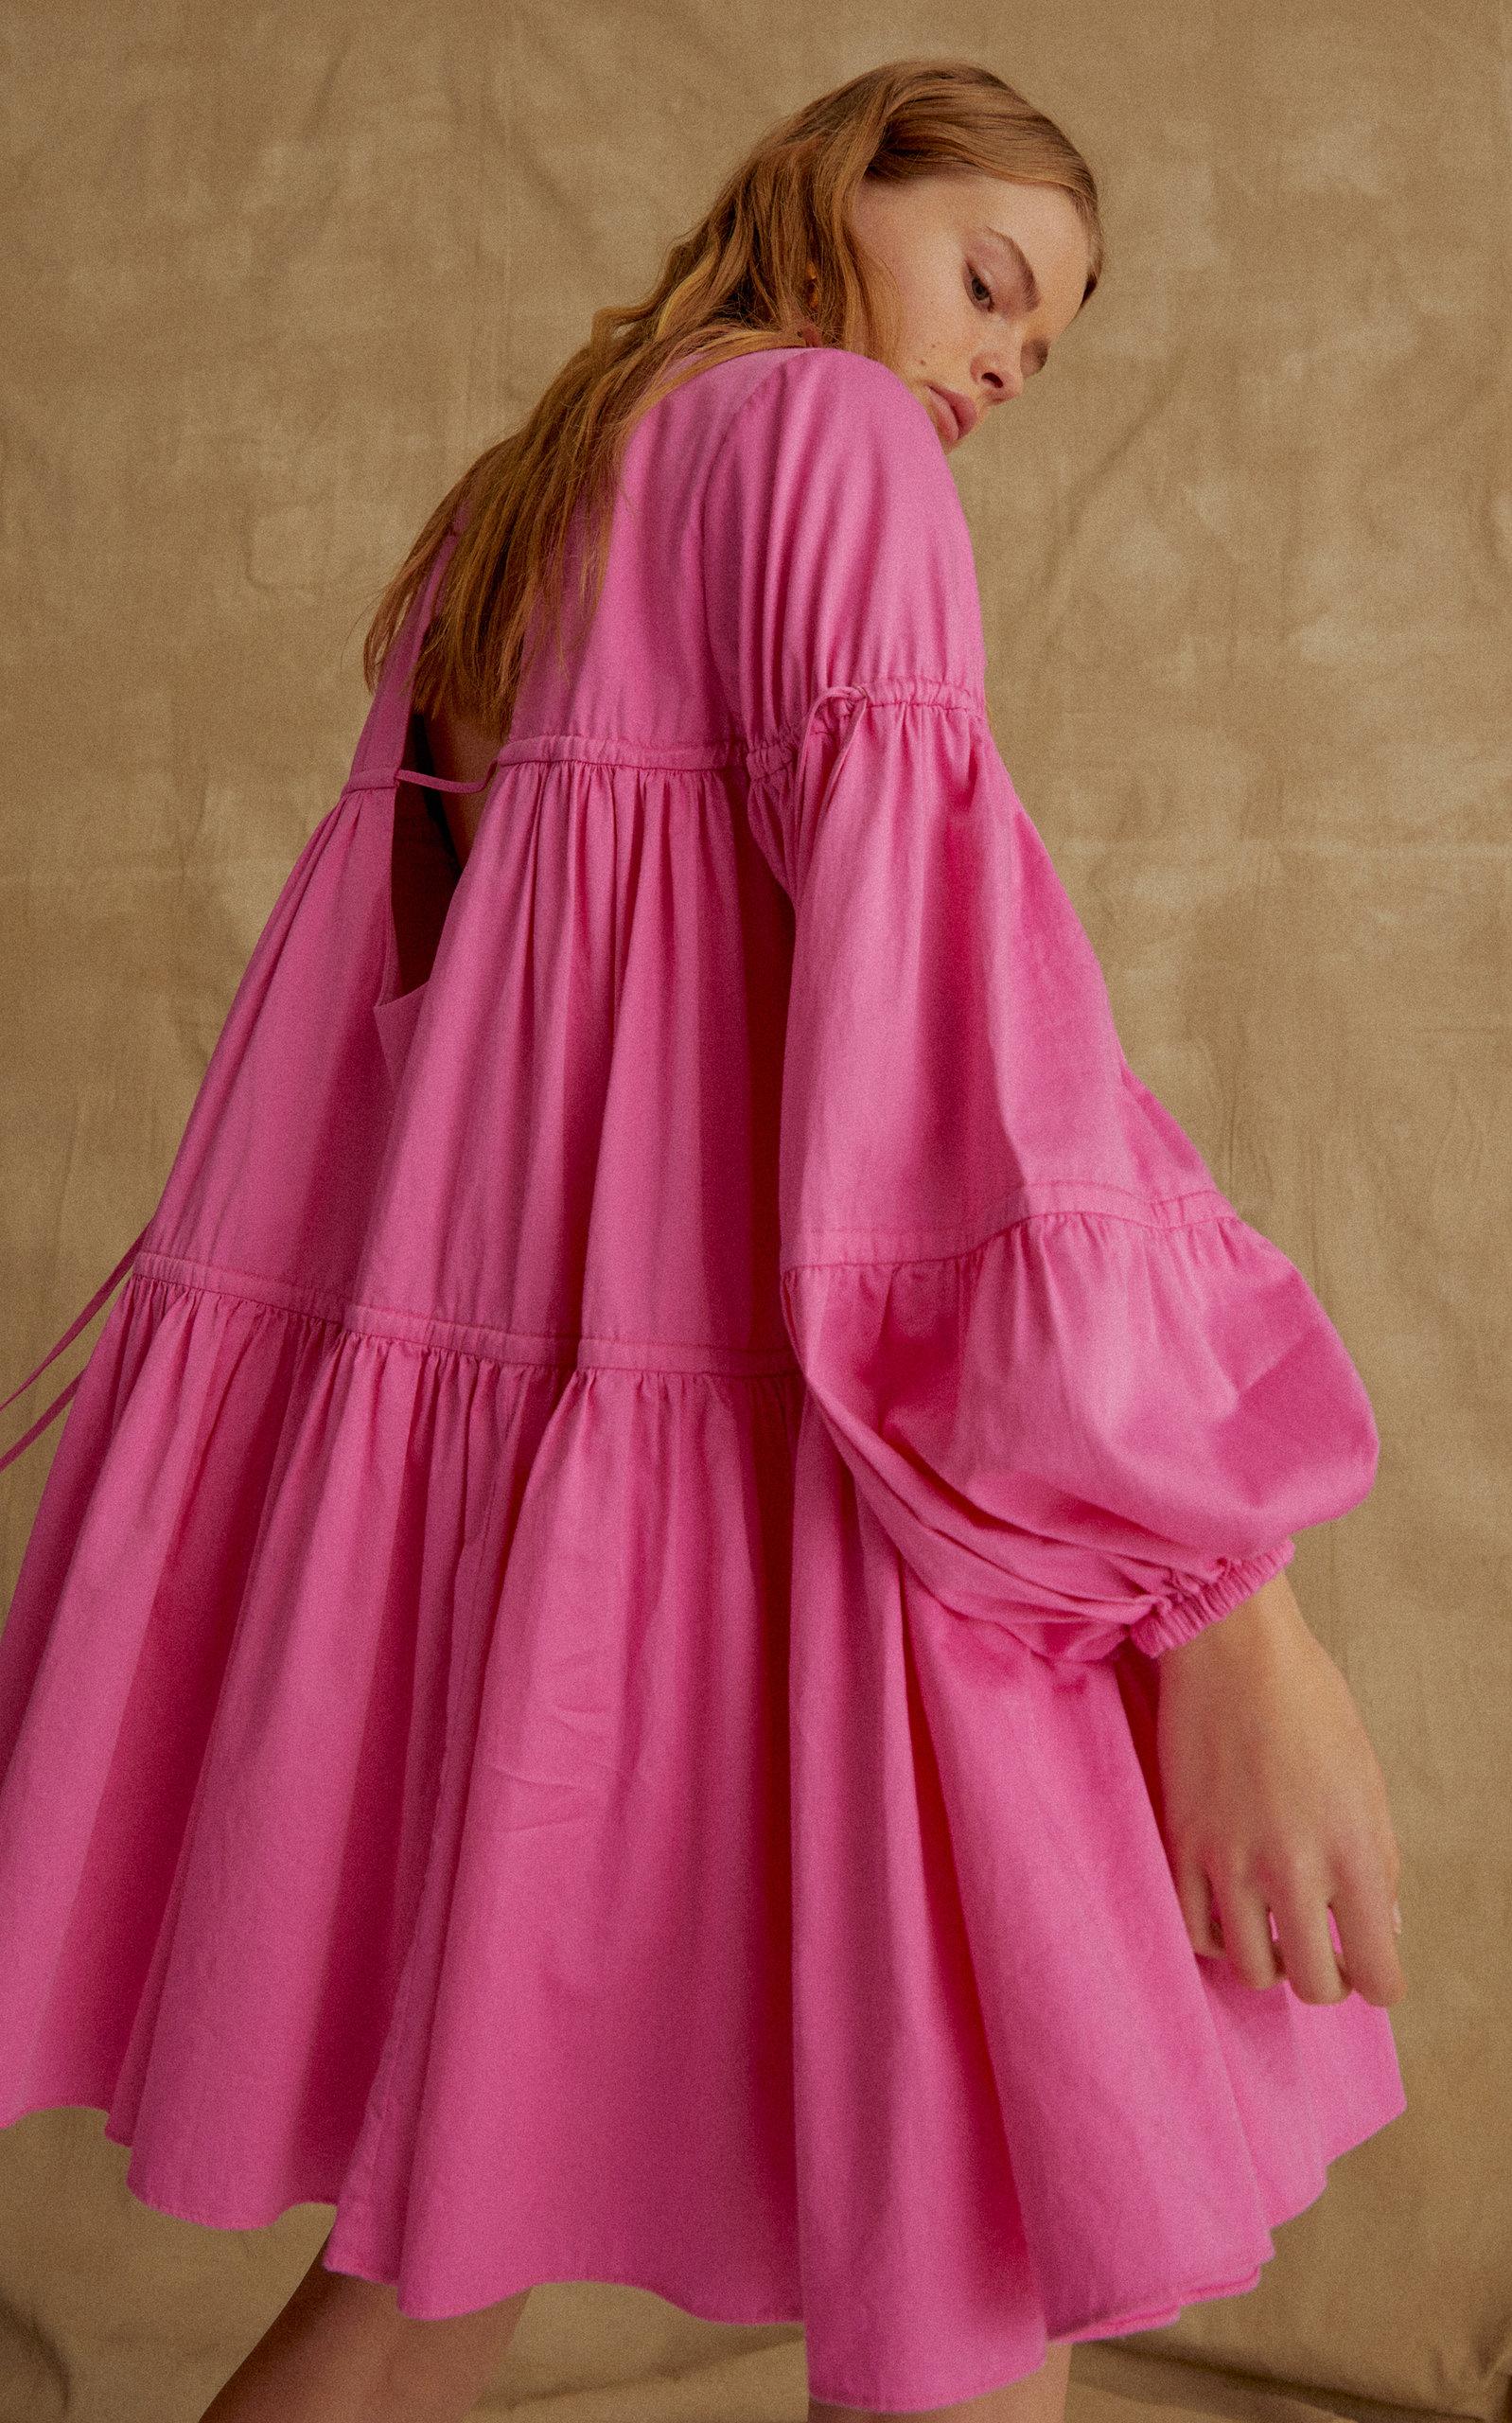 Aje. Allégro Gathered Cotton-blend Smock in Pink - Lyst